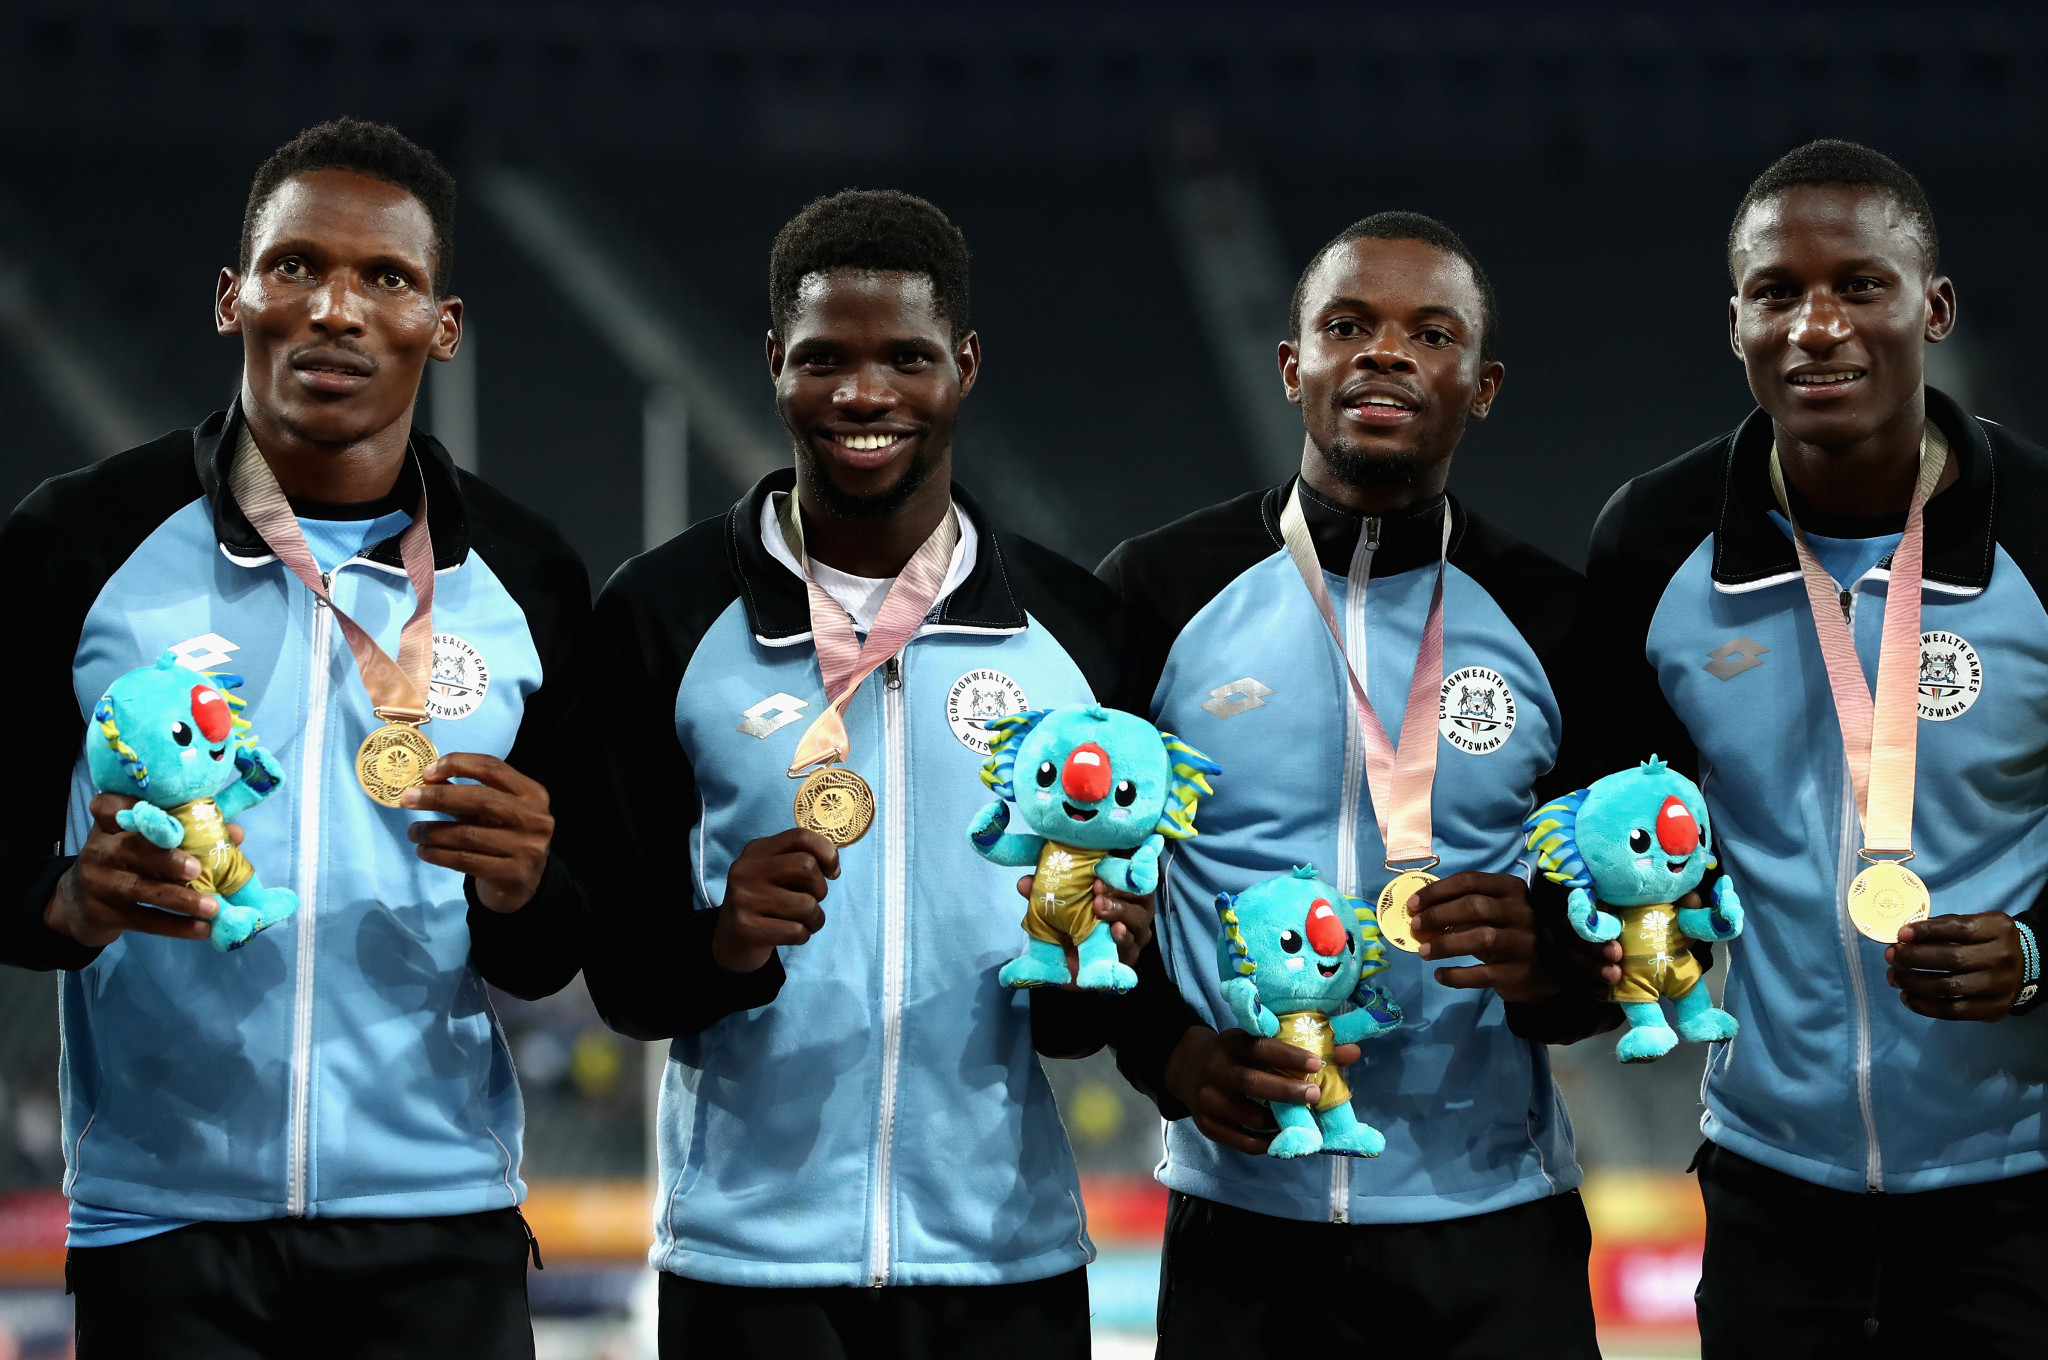 Baboloki Thebe and Onkabetse Nkobolo won gold in the men's 4x400m relay at the Gold Coast 2018 Commonwealth Games ©Getty Images